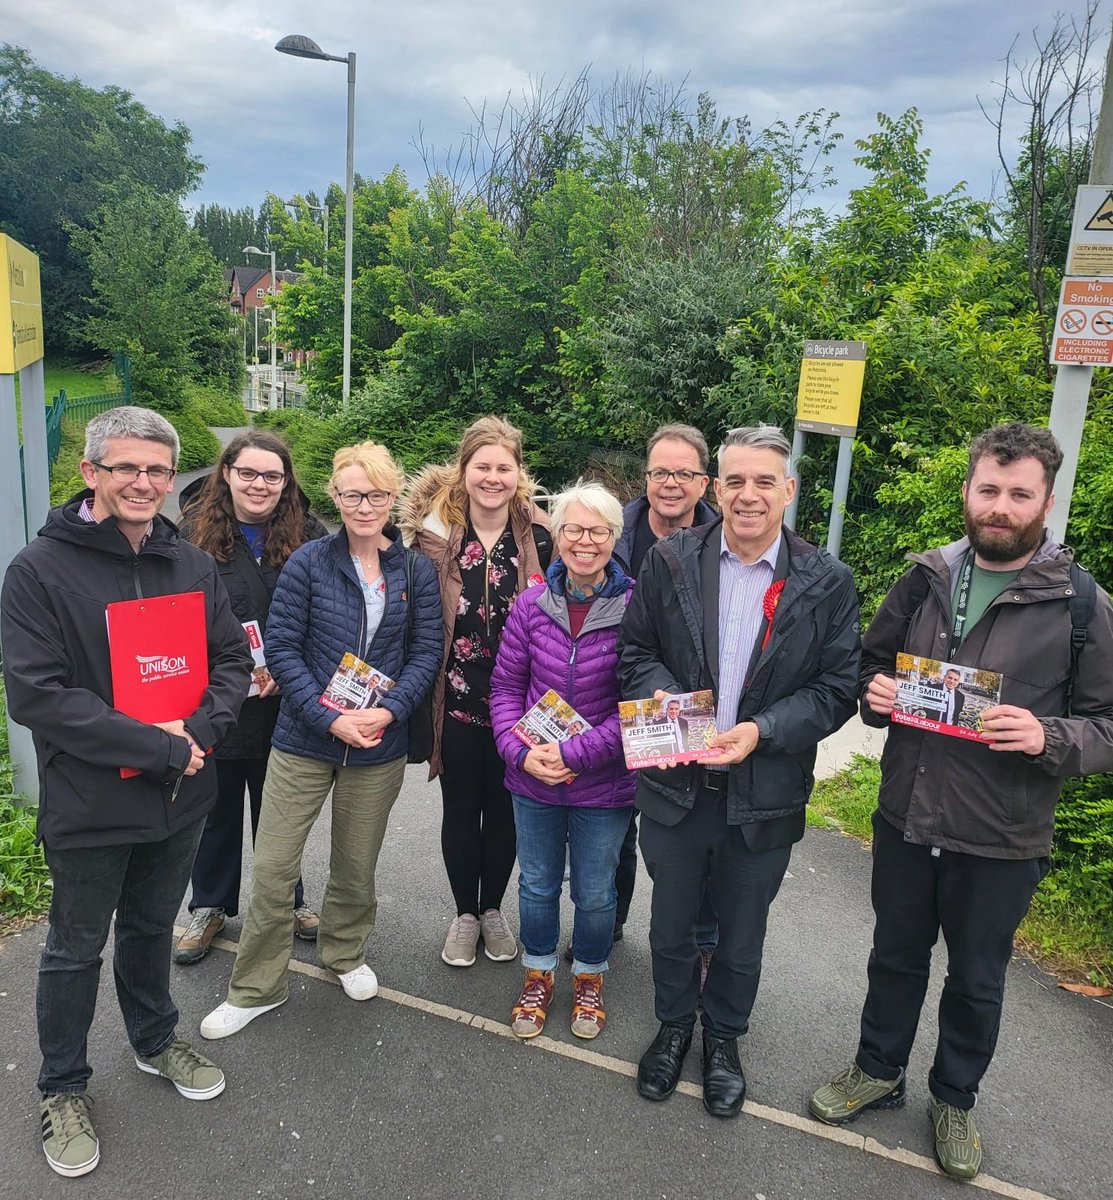 Good campaign session this evening in Didsbury with lots of support for @JeffSmithetc and the change that a Labour government will bring if elected on July 4th.🌹

Some people still registering to vote, which you can quickly do online here:

➡️gov.uk/register-to-vo…

#VoteLabour